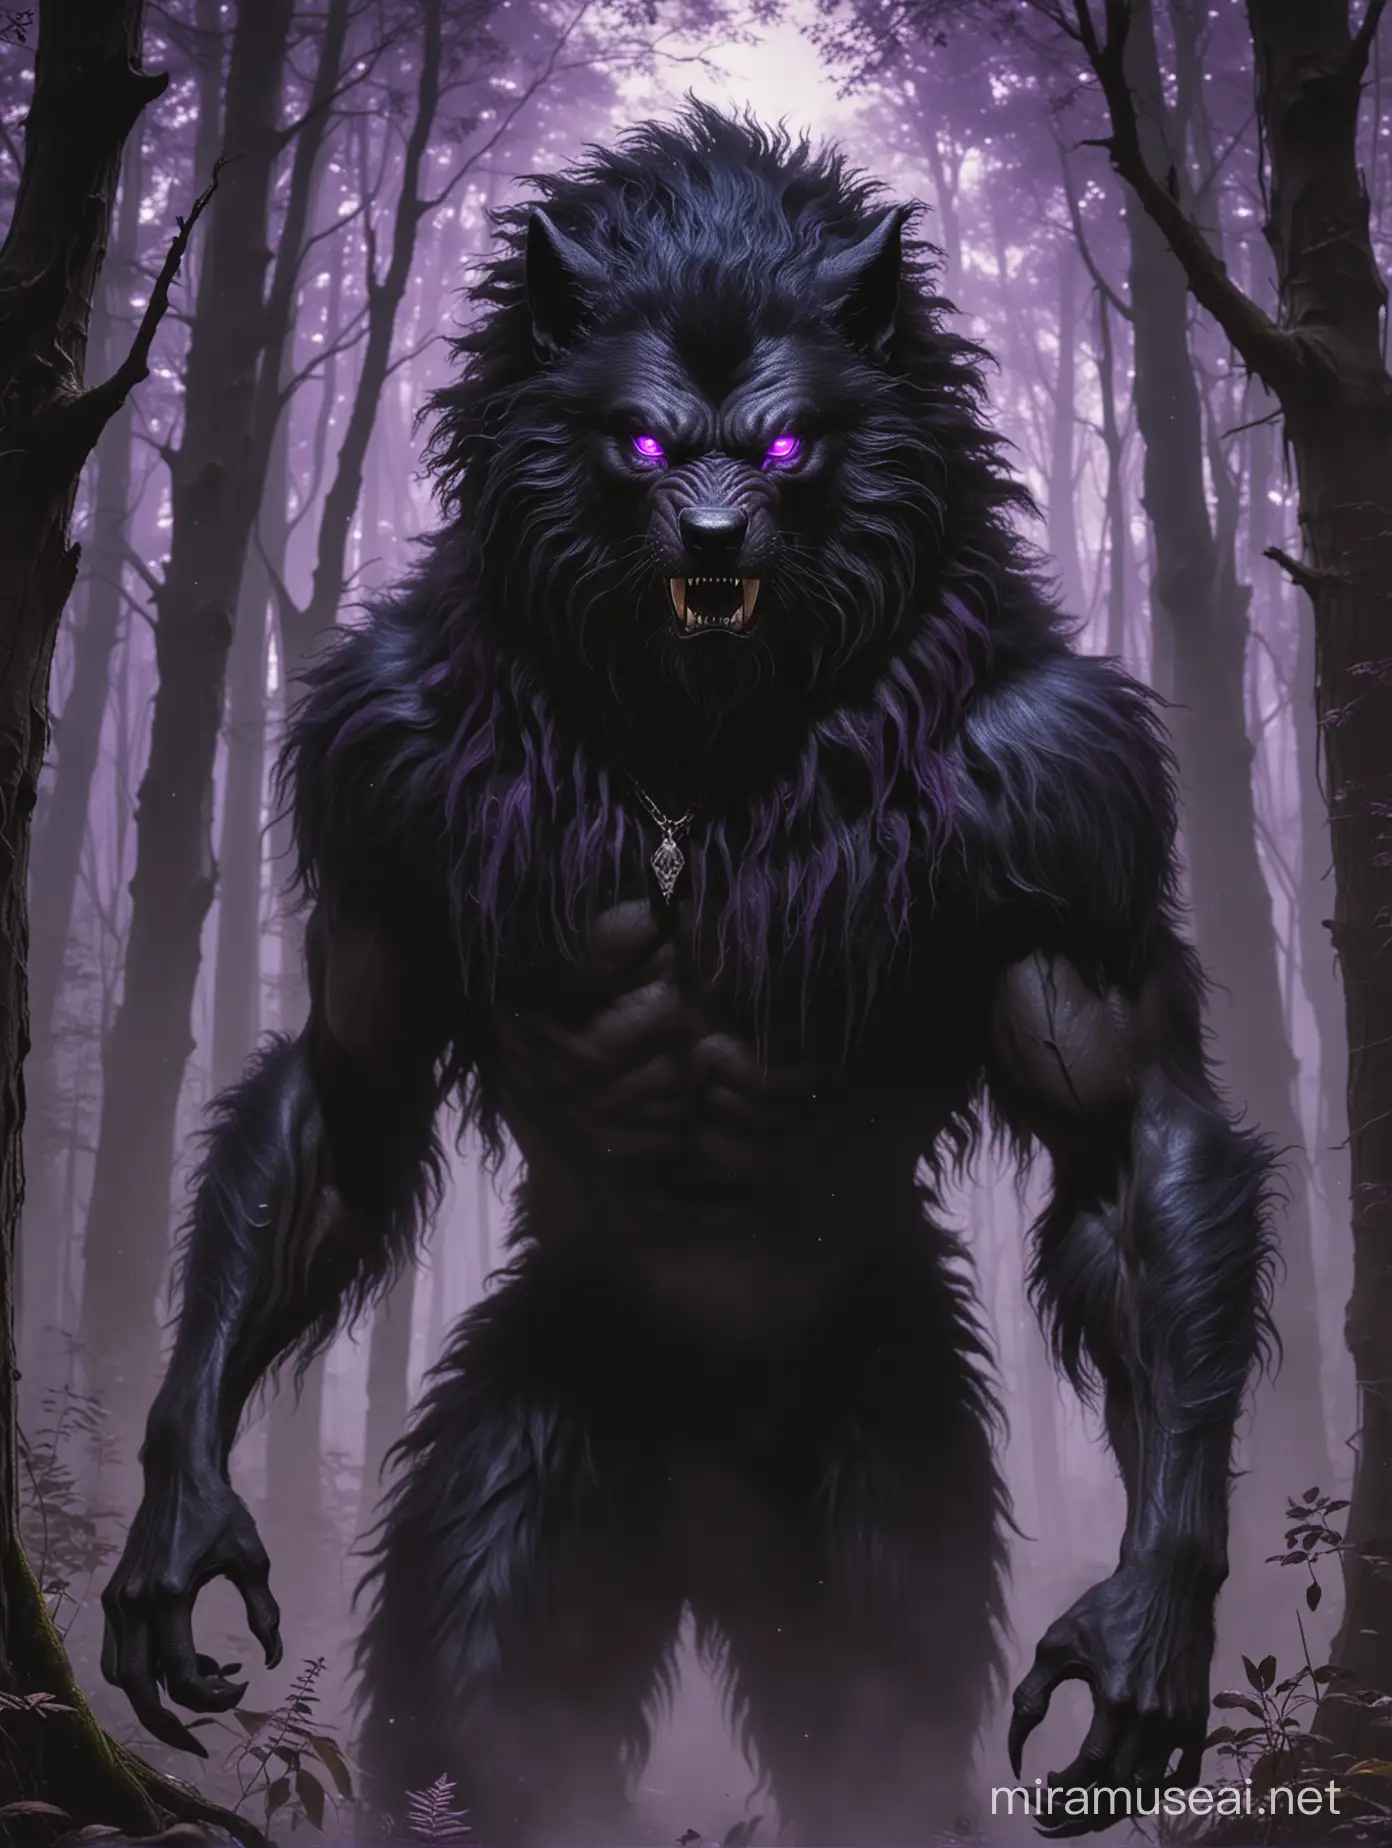 Majestic Black Werewolf Roaming Enchanted Forest with Piercing Purple Eyes